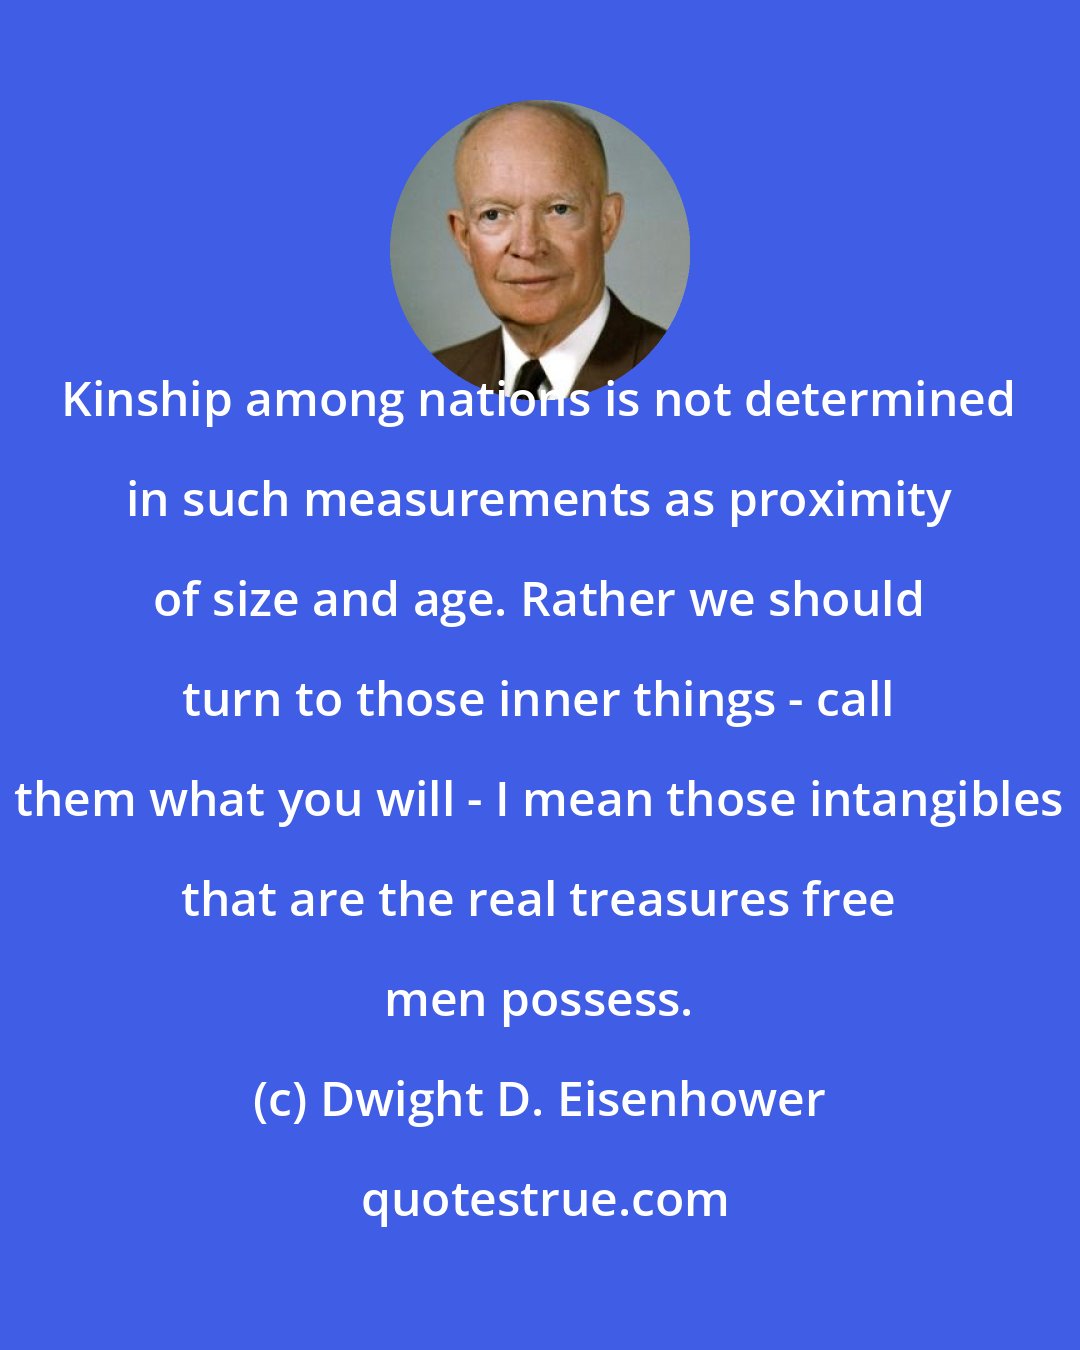 Dwight D. Eisenhower: Kinship among nations is not determined in such measurements as proximity of size and age. Rather we should turn to those inner things - call them what you will - I mean those intangibles that are the real treasures free men possess.